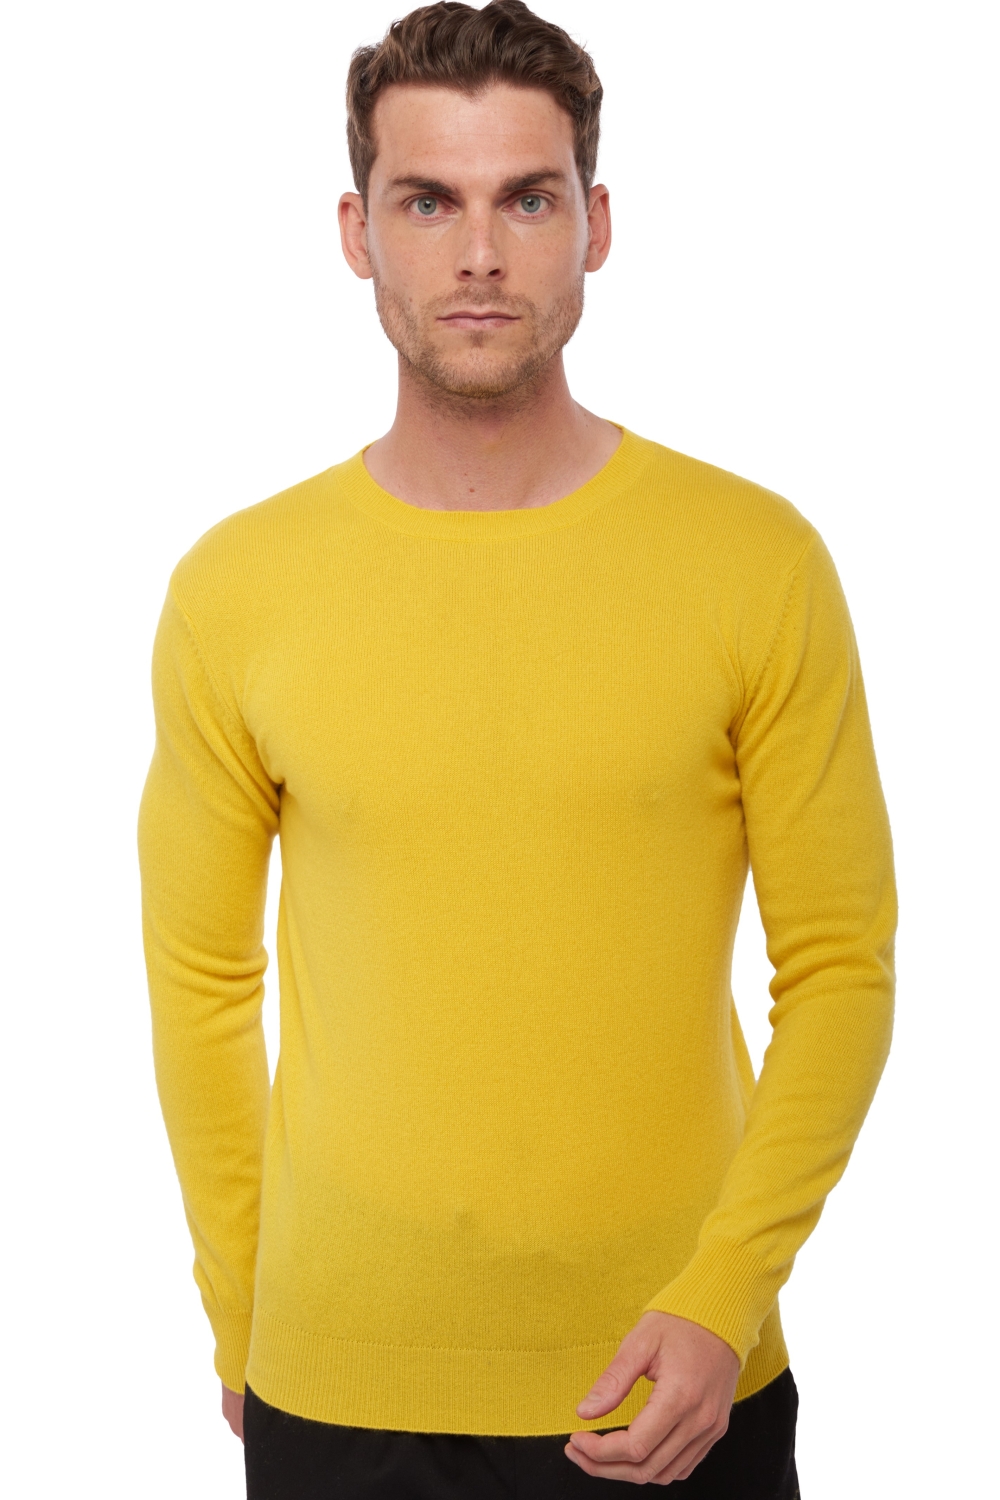 Cachemire petits prix homme tao first sunny yellow xl